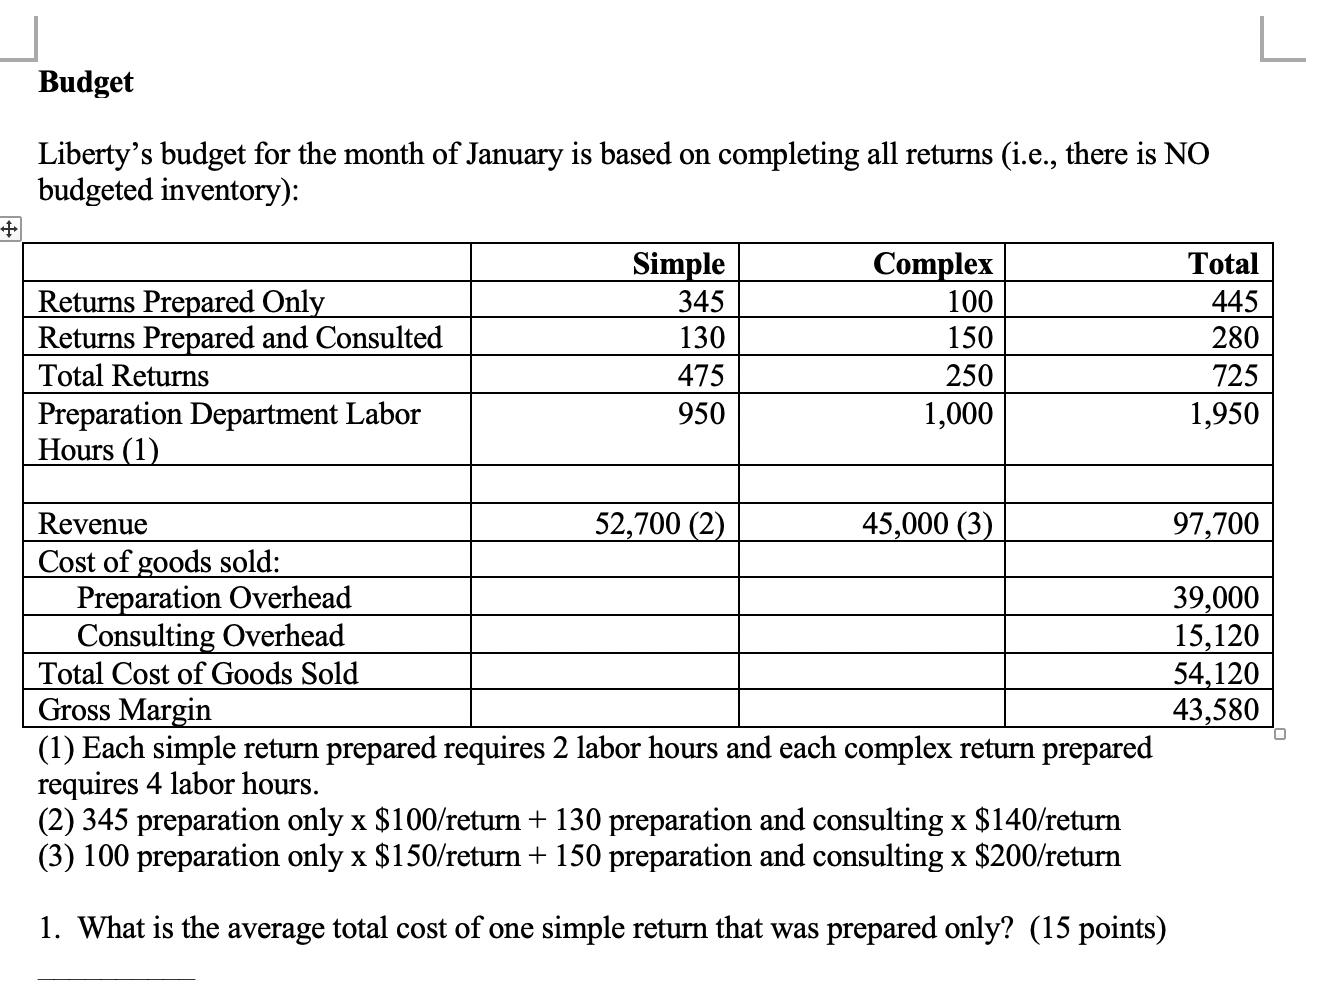 BudgetLibertys budget for the month of January is based on completing all returns (i.e., there is NObudgeted inventory):+